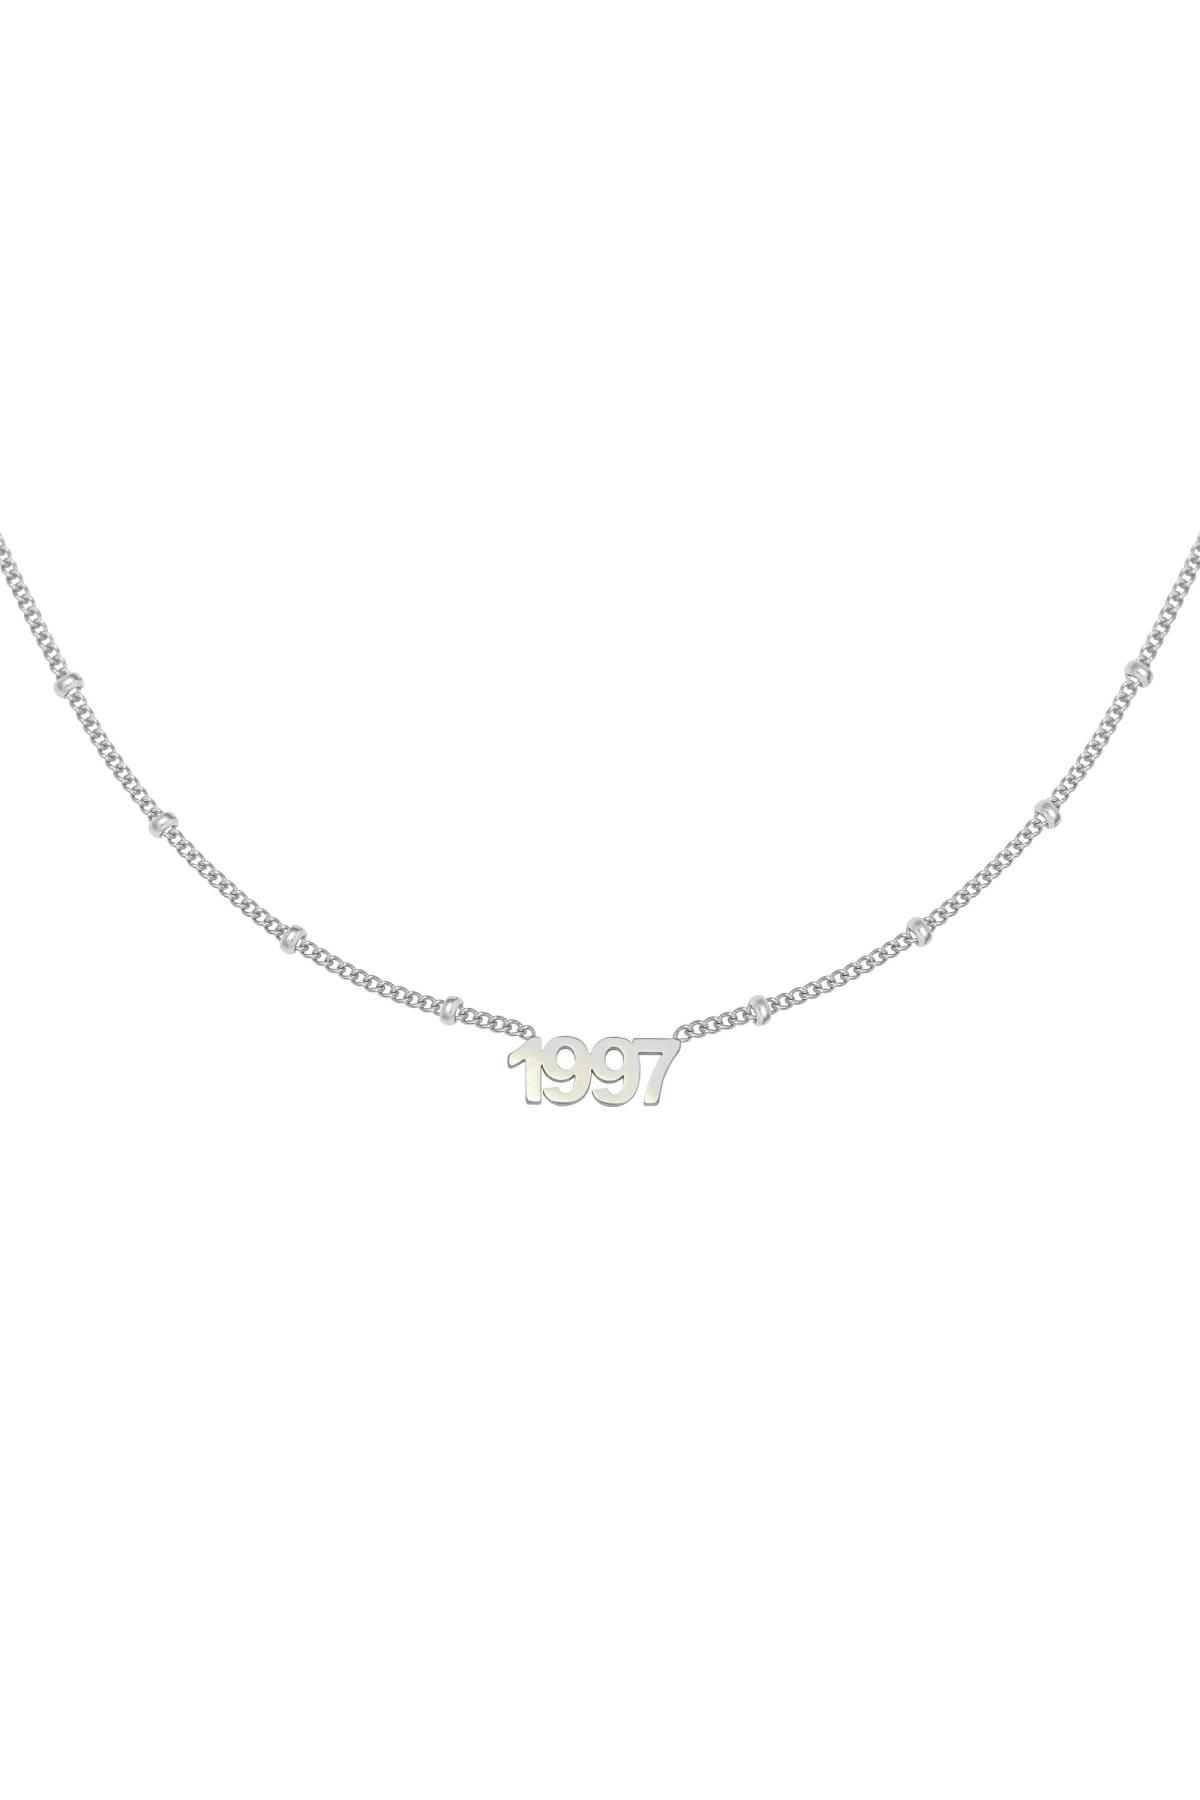 Collana Anno 1997 Silver Stainless Steel